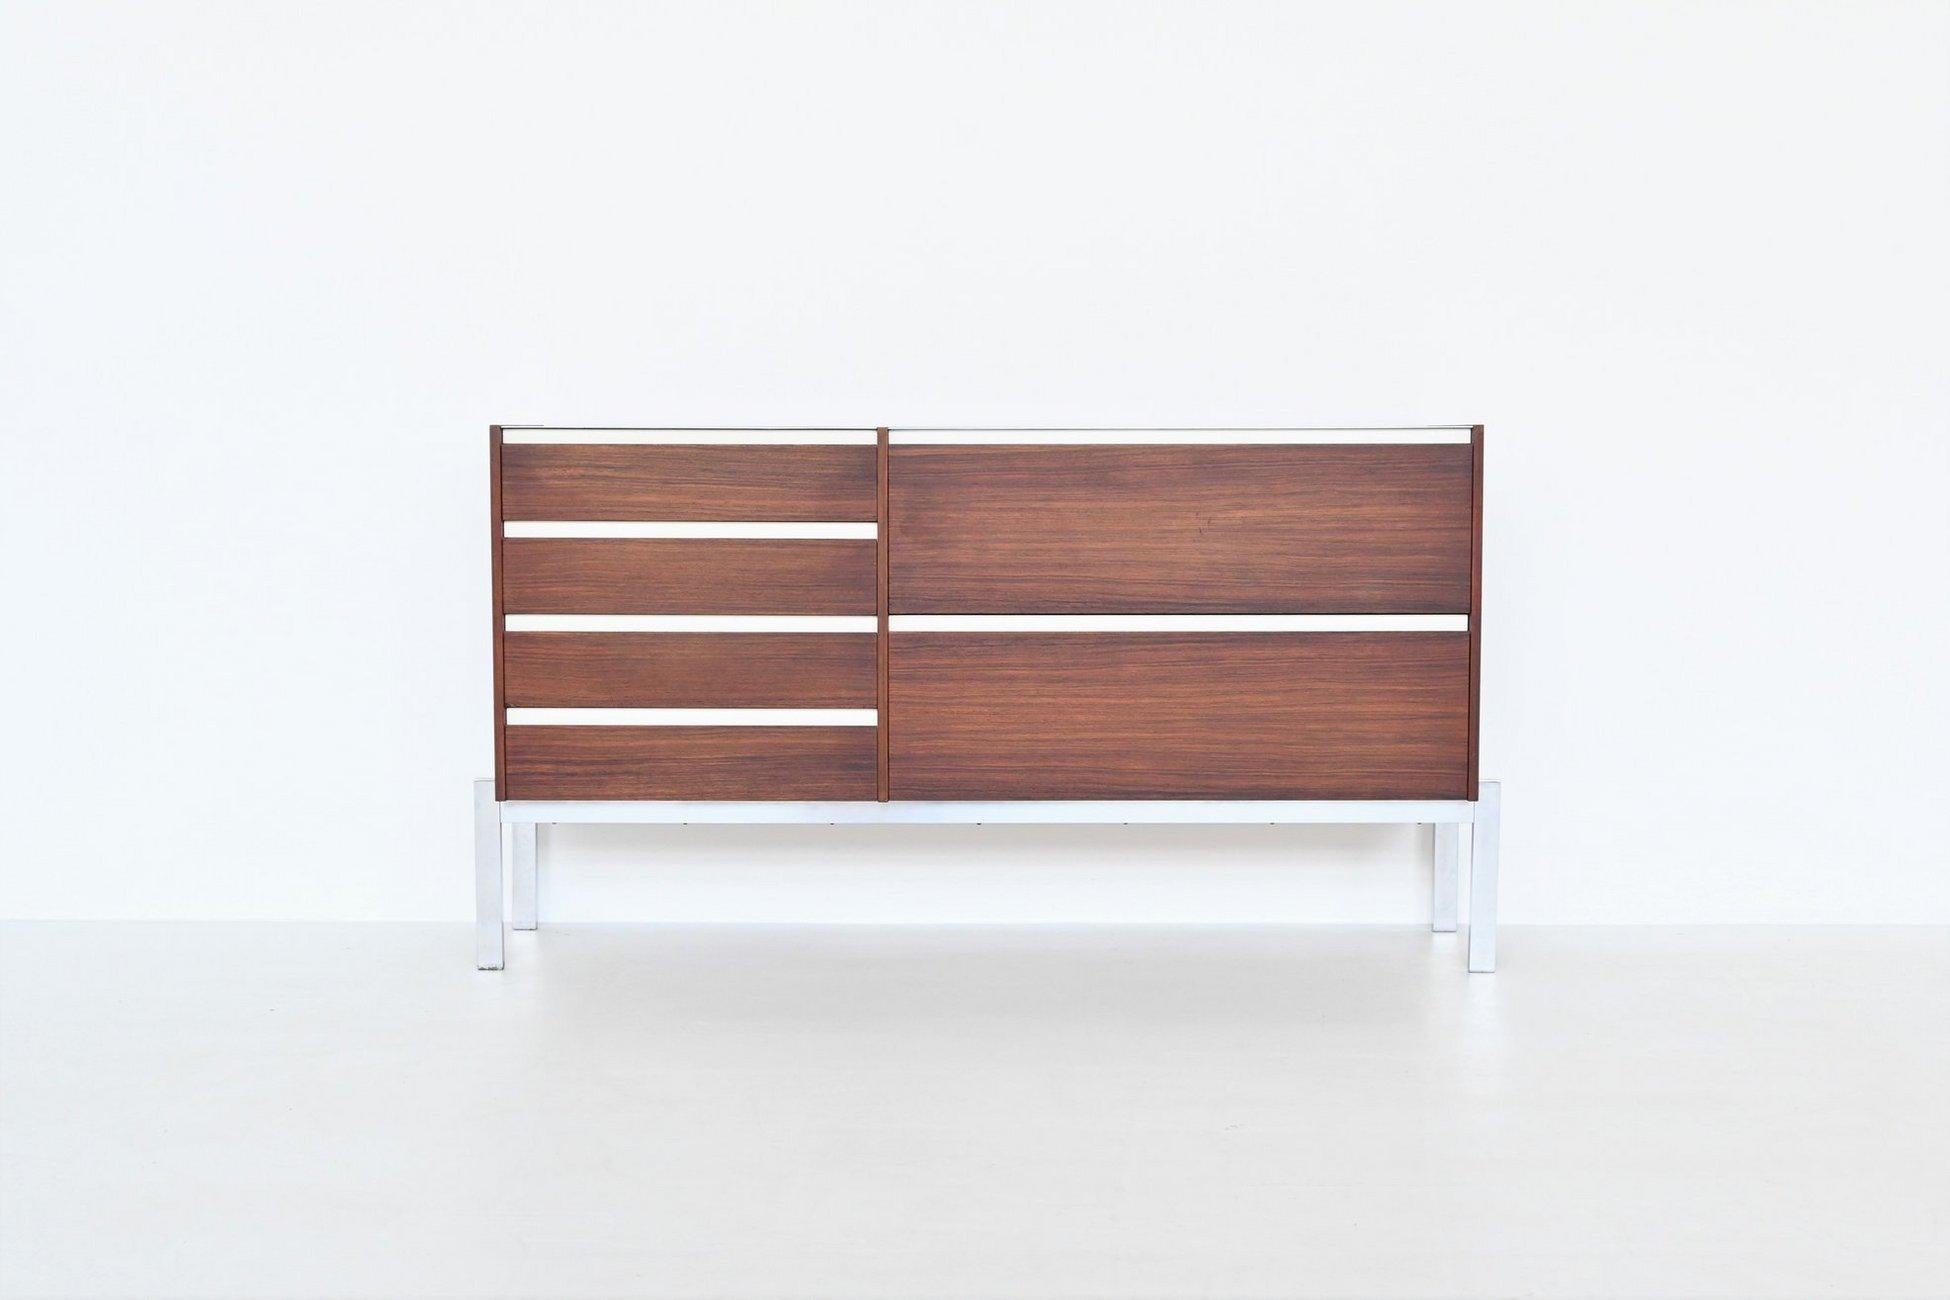 Beautiful shaped modernist sideboard designed by Kho Liang Ie and Wim Crouwel and manufactured by Fristho Franeker, The Netherlands 1957. This fantastic sideboard is executed in nicely grained teak supported by a chrome plated metal frame. Very nice